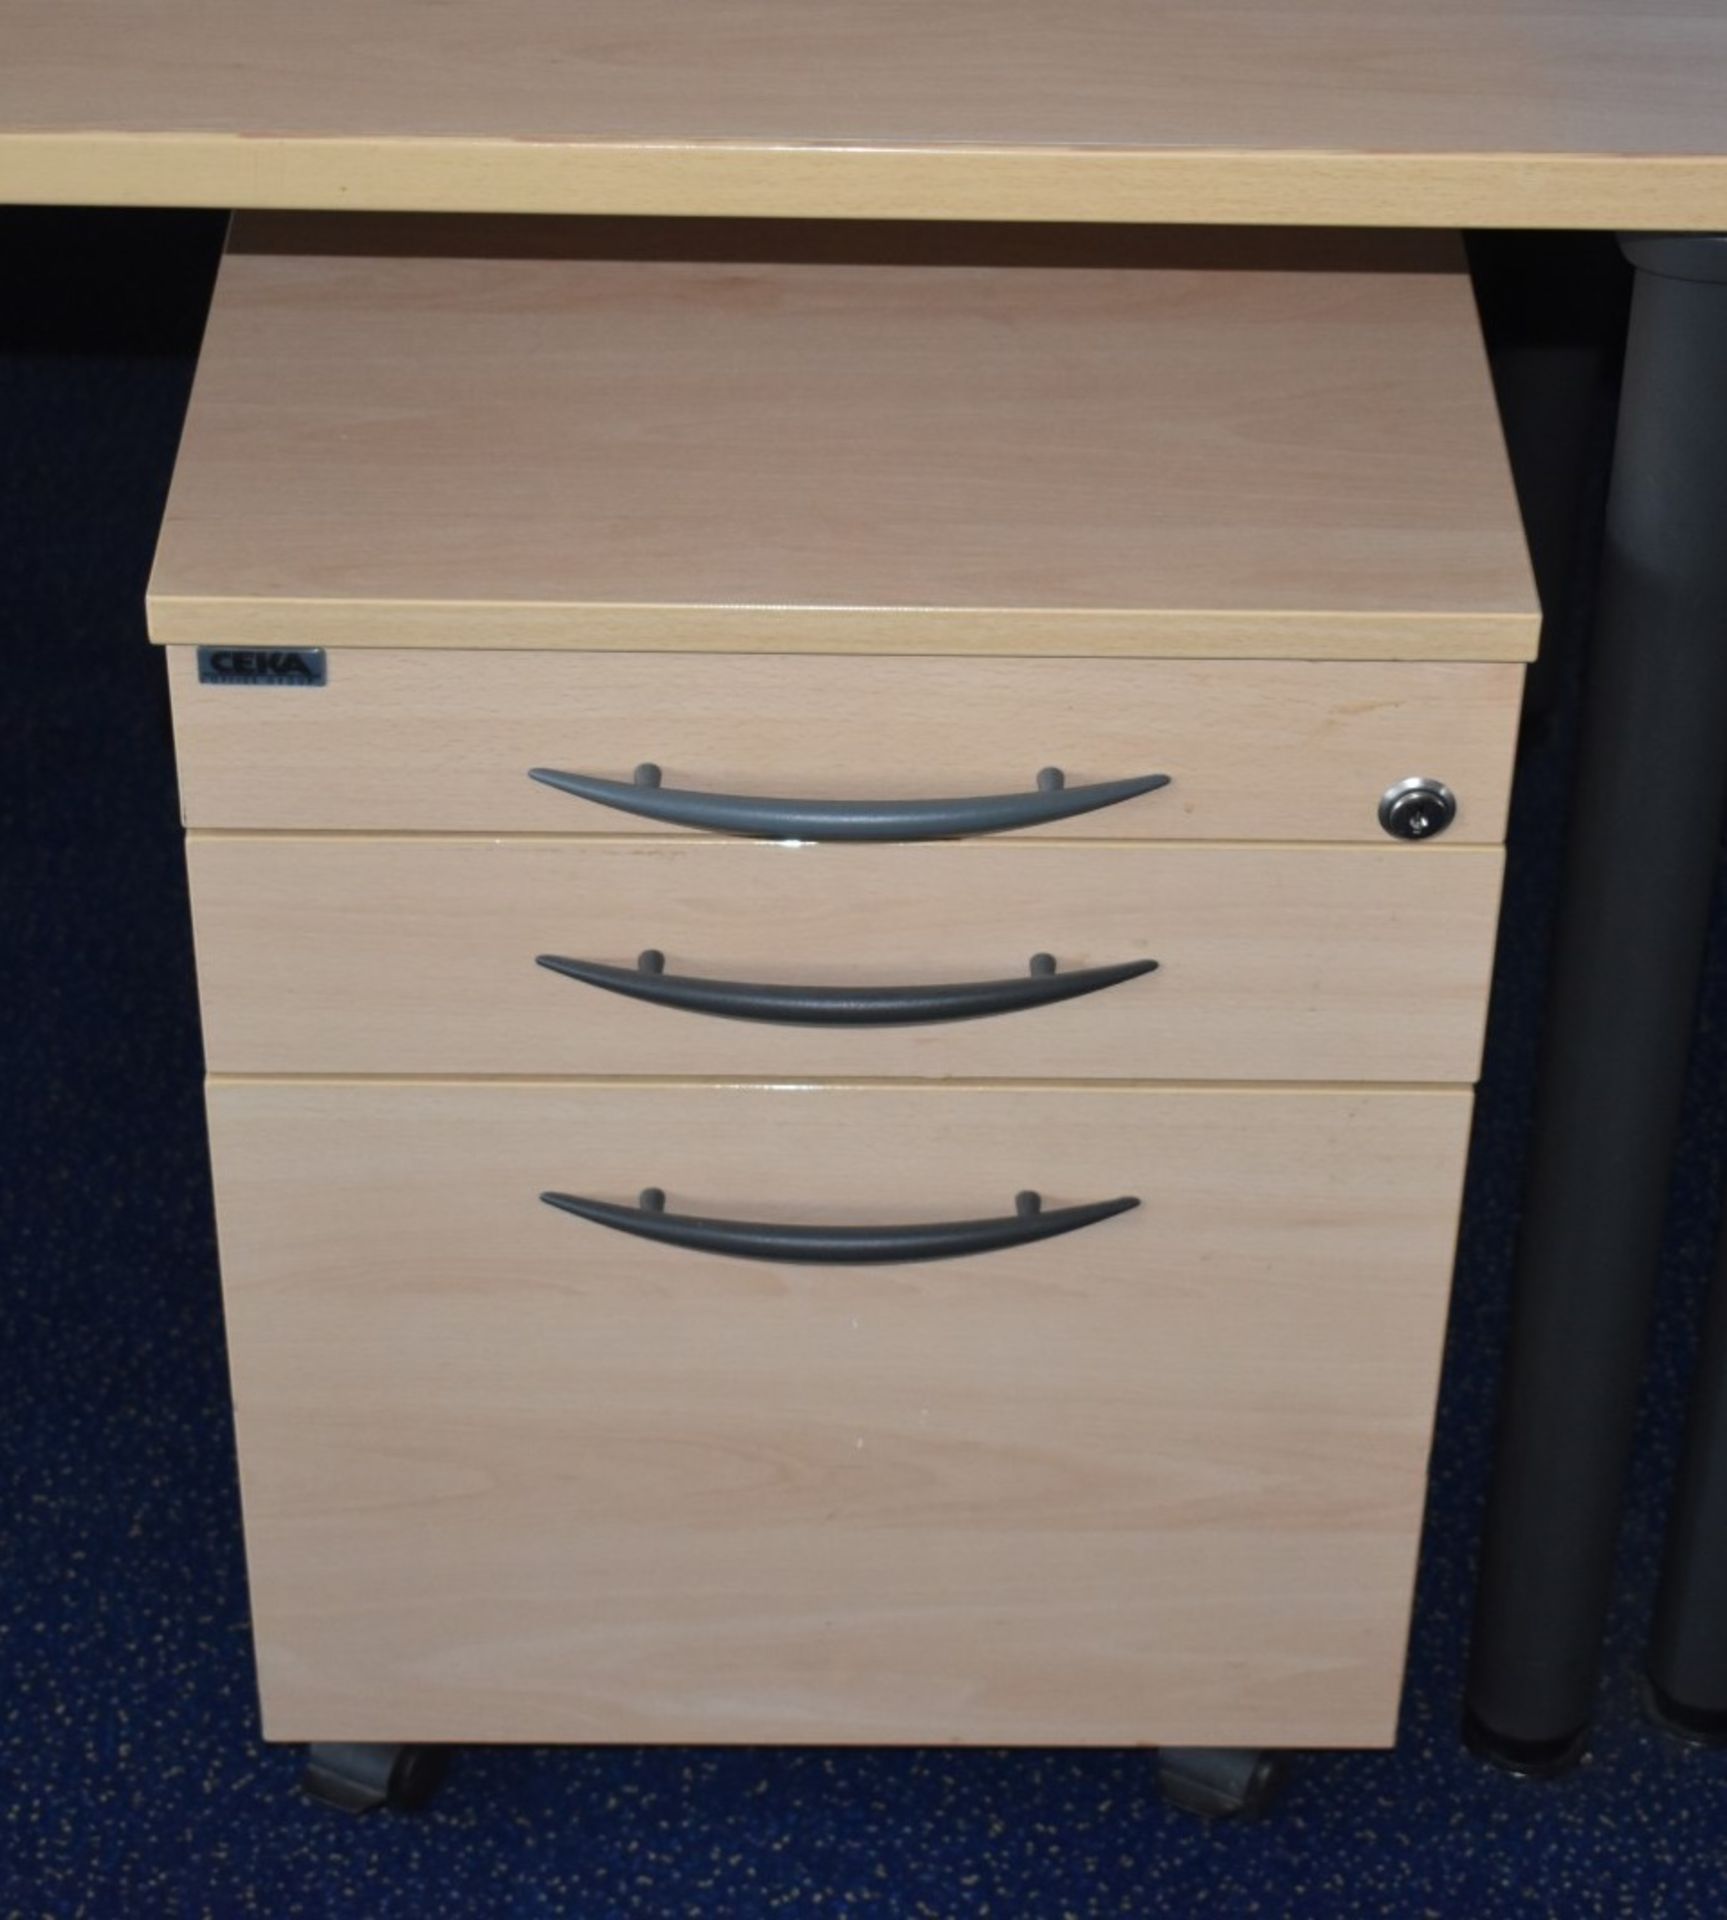 8 x Beech Office Desks With Drawer Pedestals and Privacy Partitions - H72 x W160 x D80 cms - Ref - Image 11 of 11